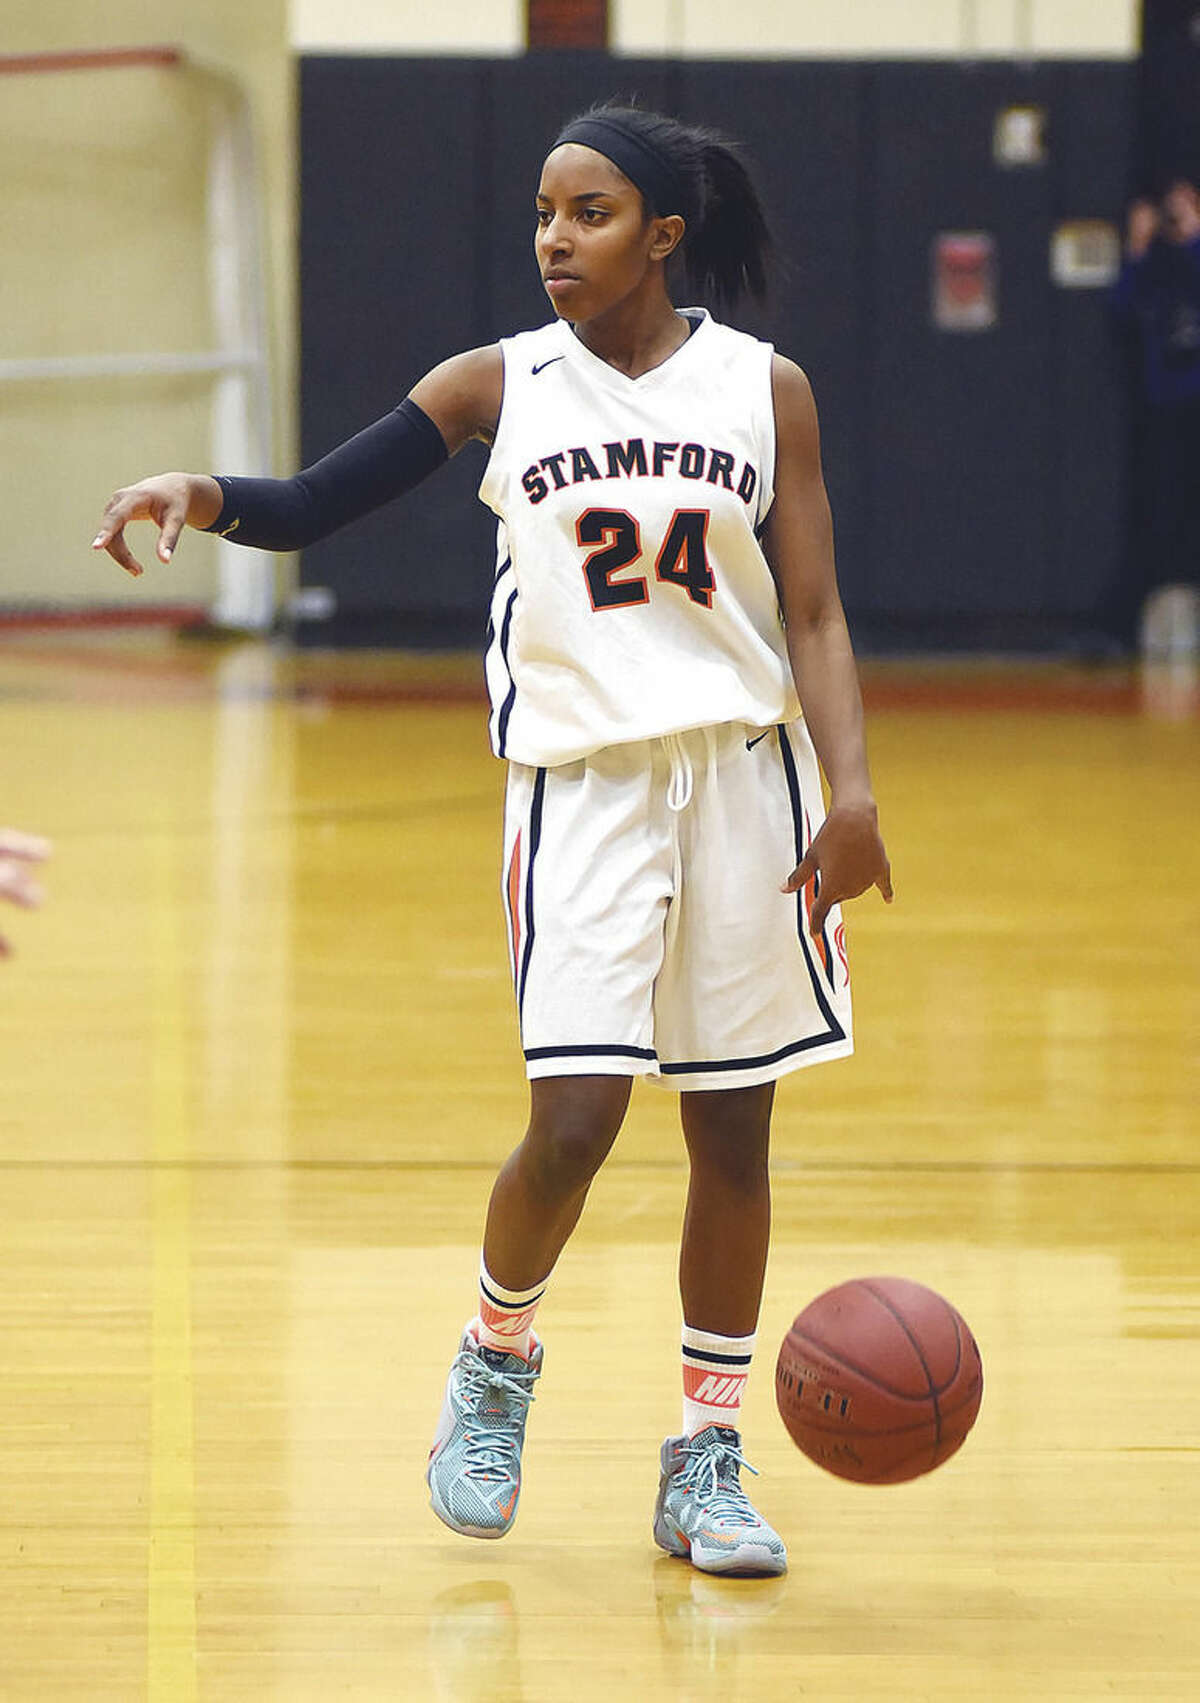 On The Record: An interview with Stamford High's Tiana England